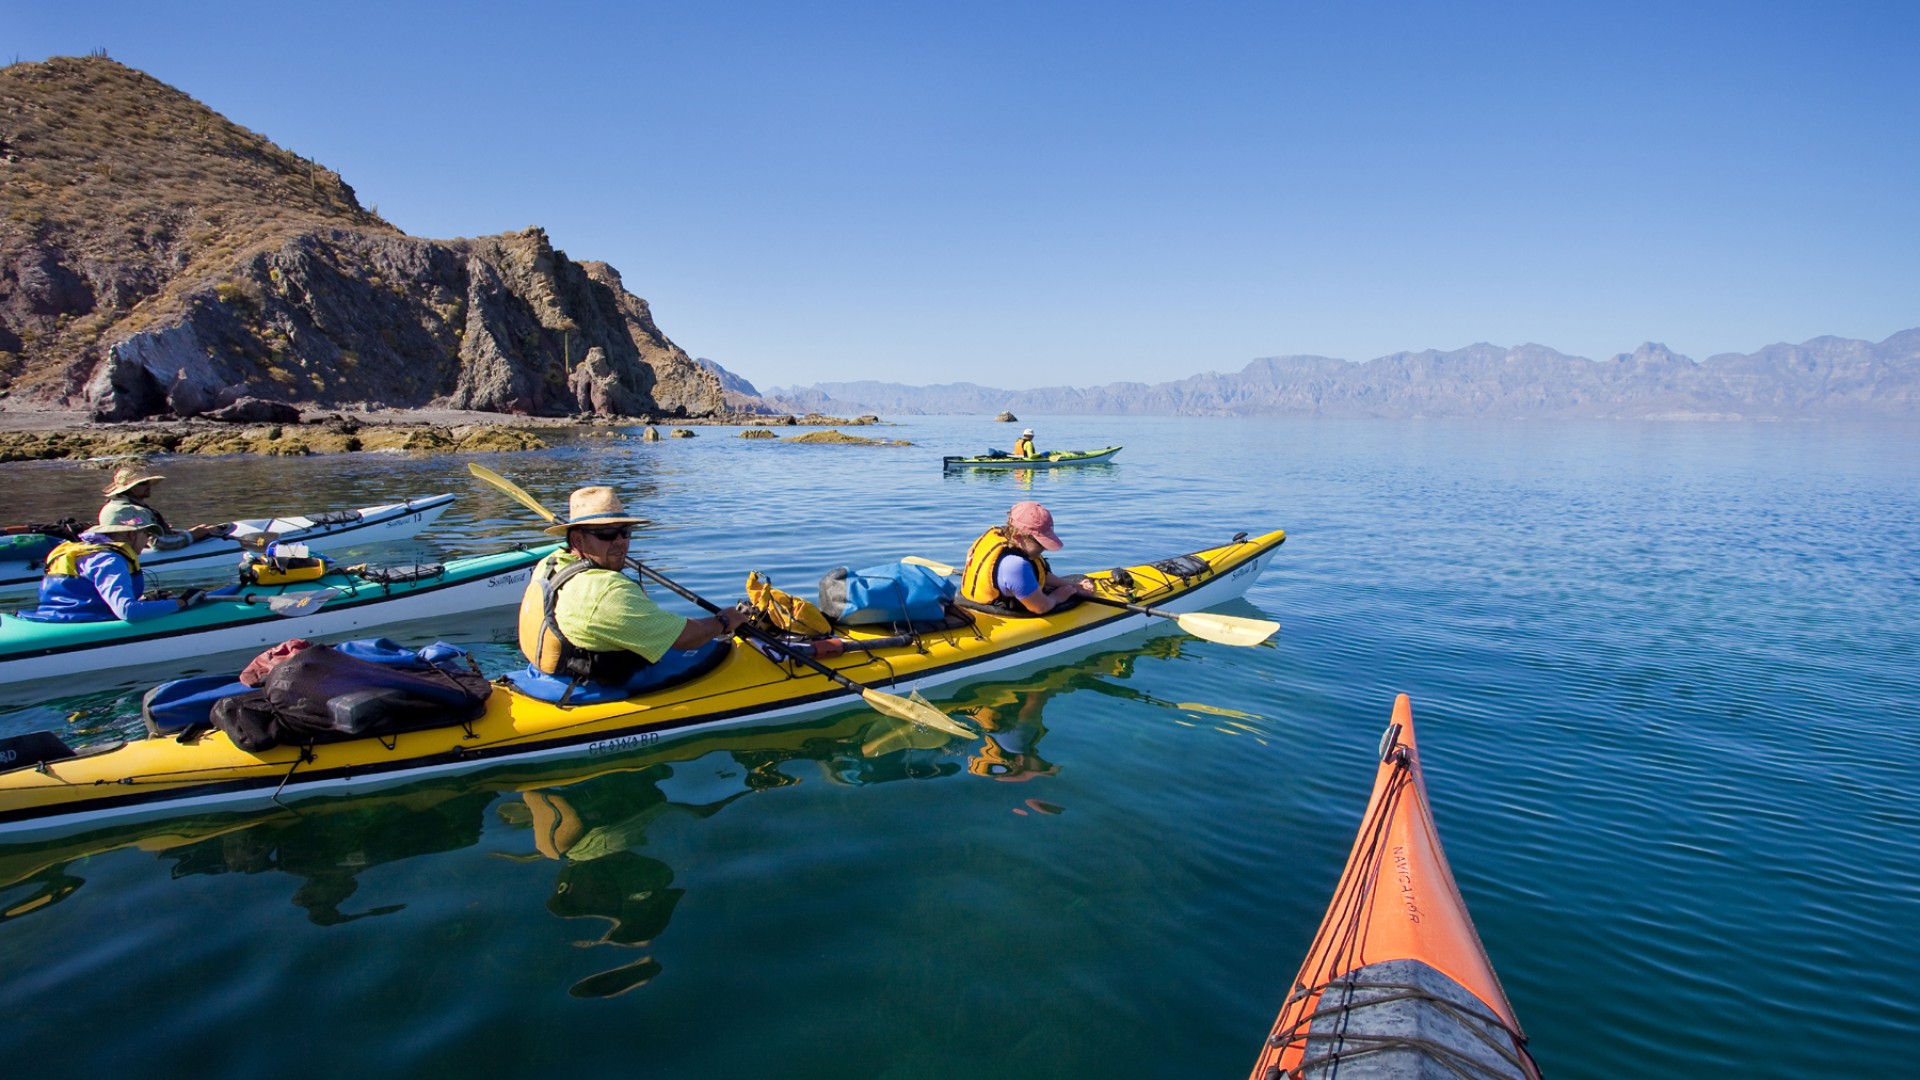 Sea kayakers looking into the Sea of Cortez for wildlife from their kayaks alongside Carmen Island in Loreto Bay National Park